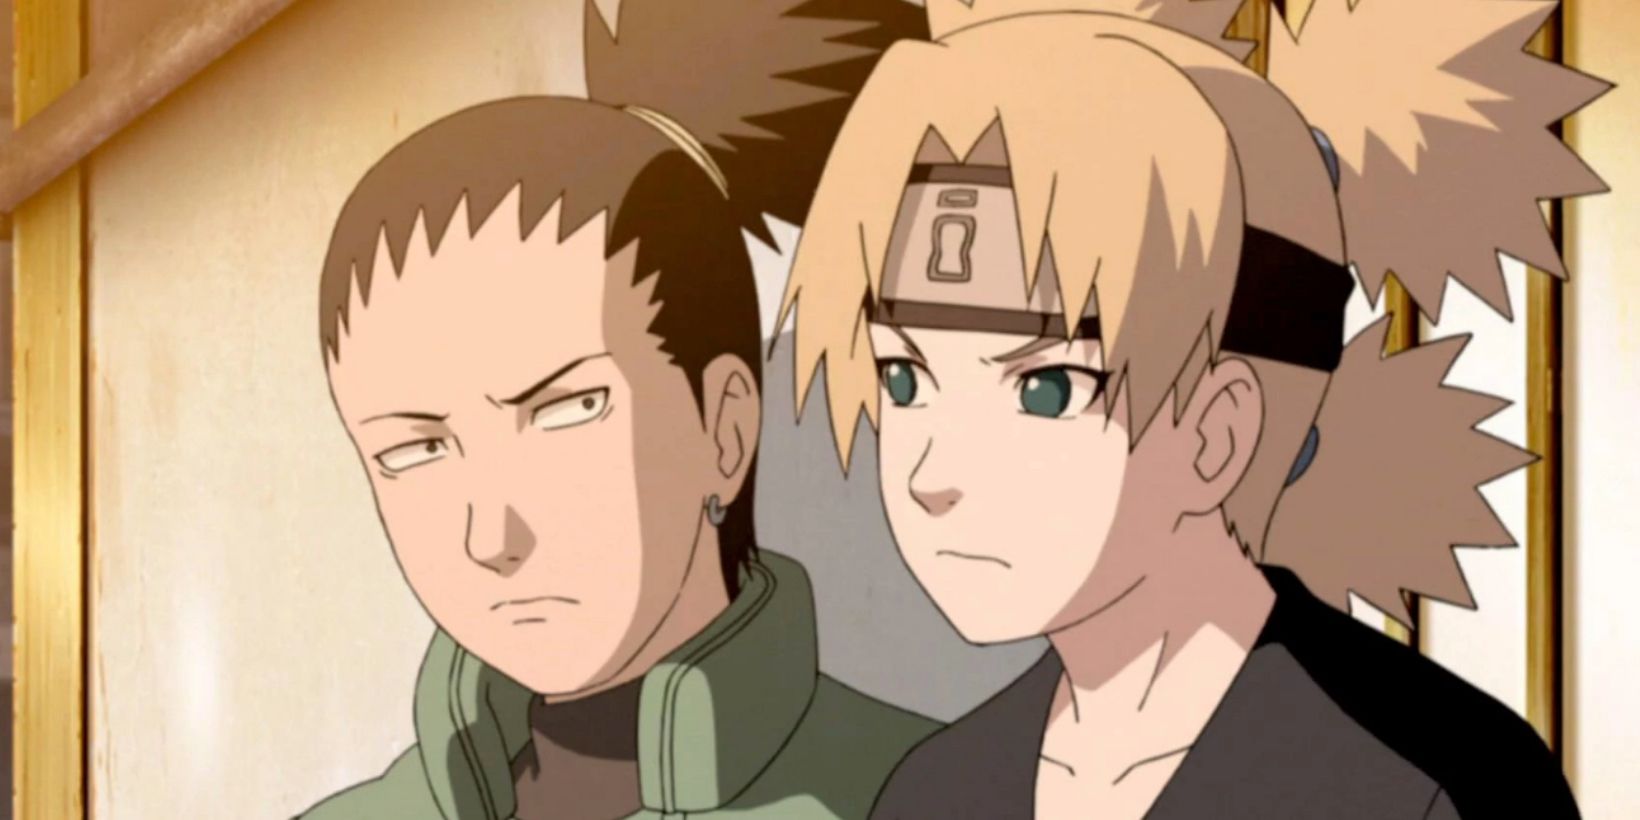 Shikamaru and Temari stare at one another while sitting together to proctor the Chunin Exams in Naruto Shippuden